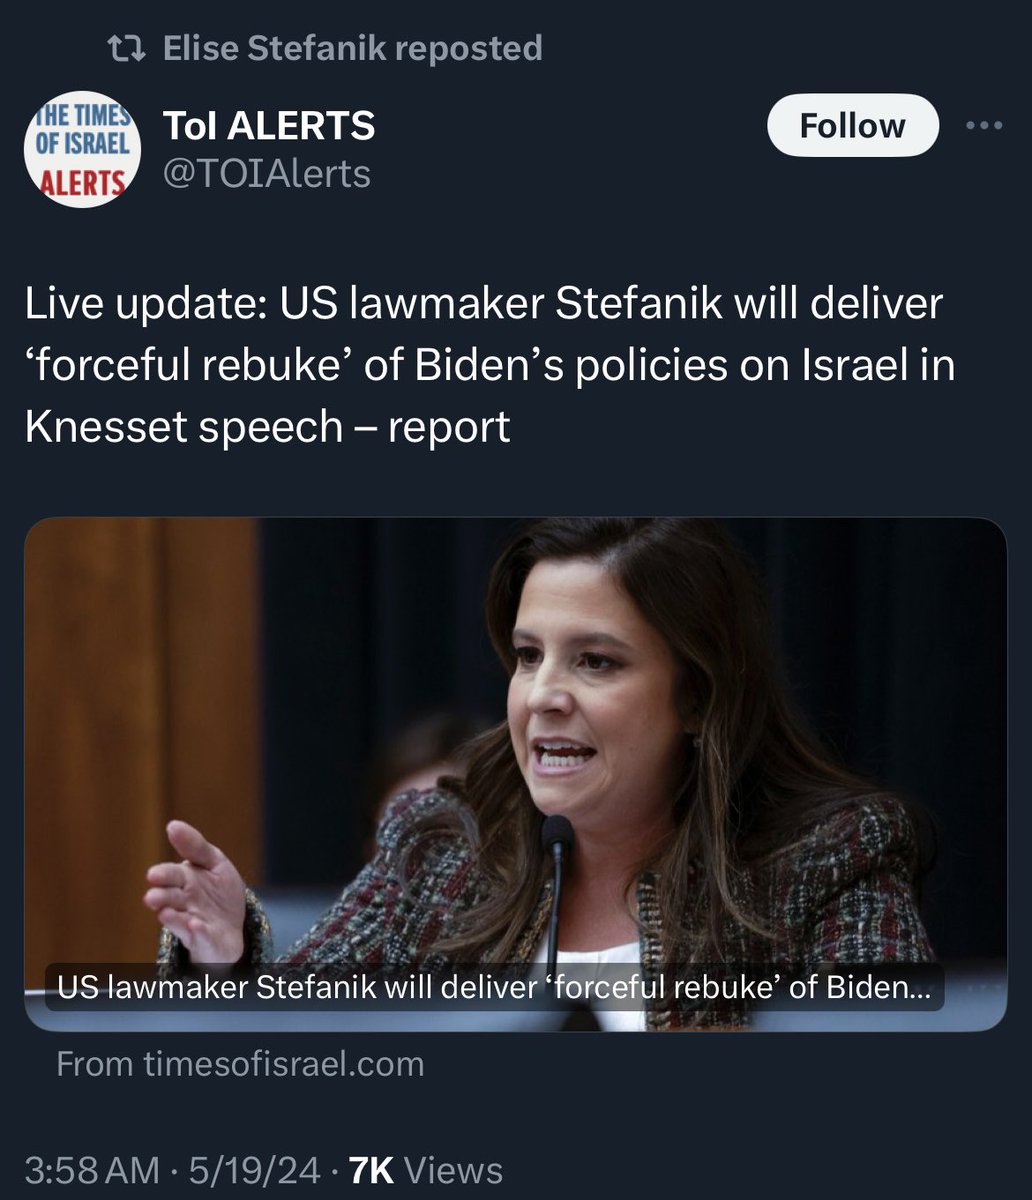 Denouncing the U.S. government in a formal address to a foreign government in the middle of a war when many members of her own party voted against aid to that same country. The invitation for this purpose and the speech itself is disgusting.